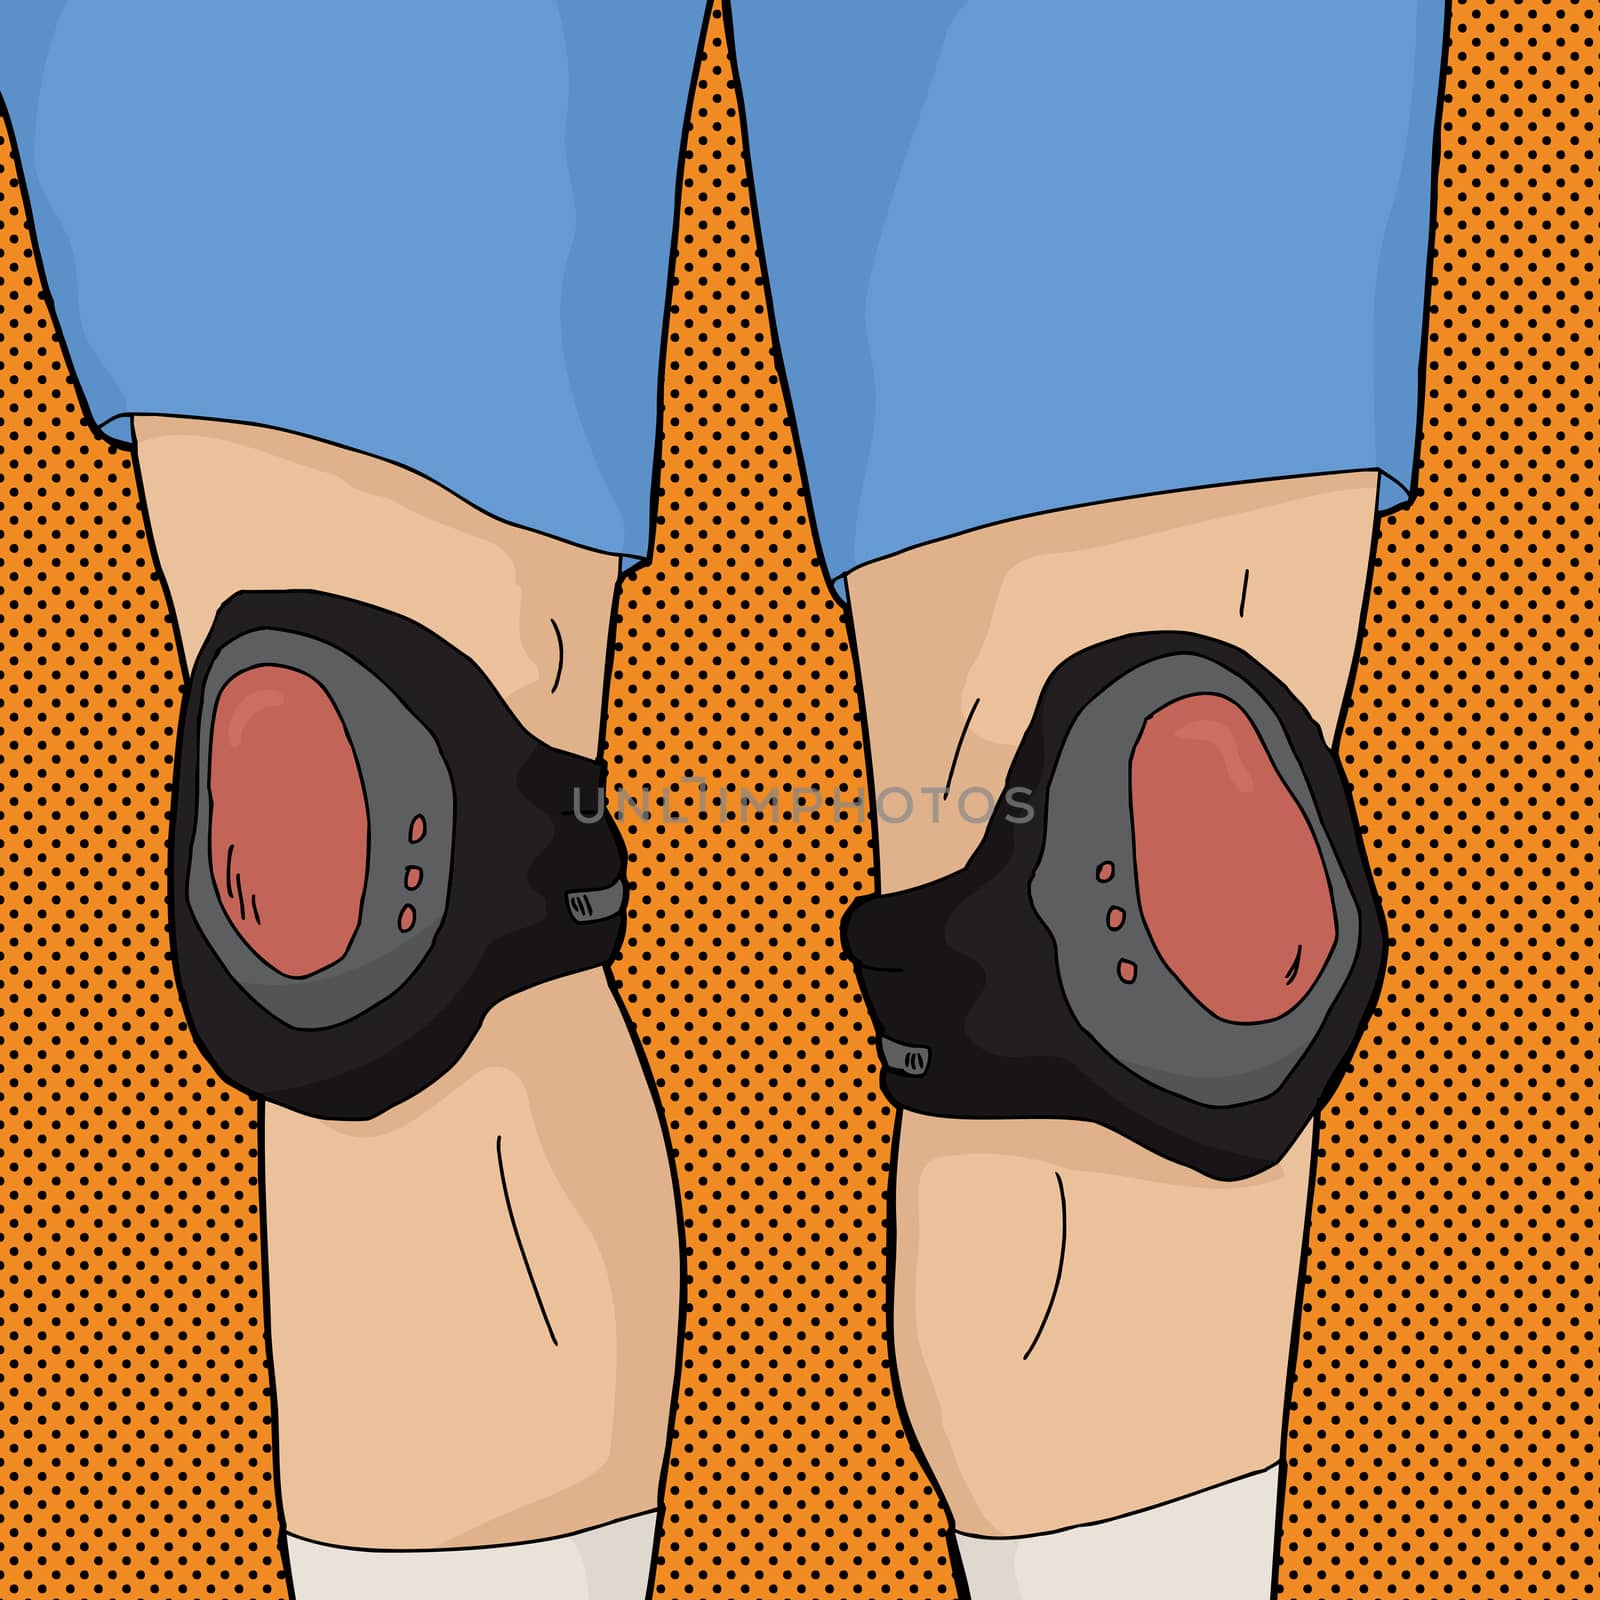 Human Legs with Knee Pads by TheBlackRhino